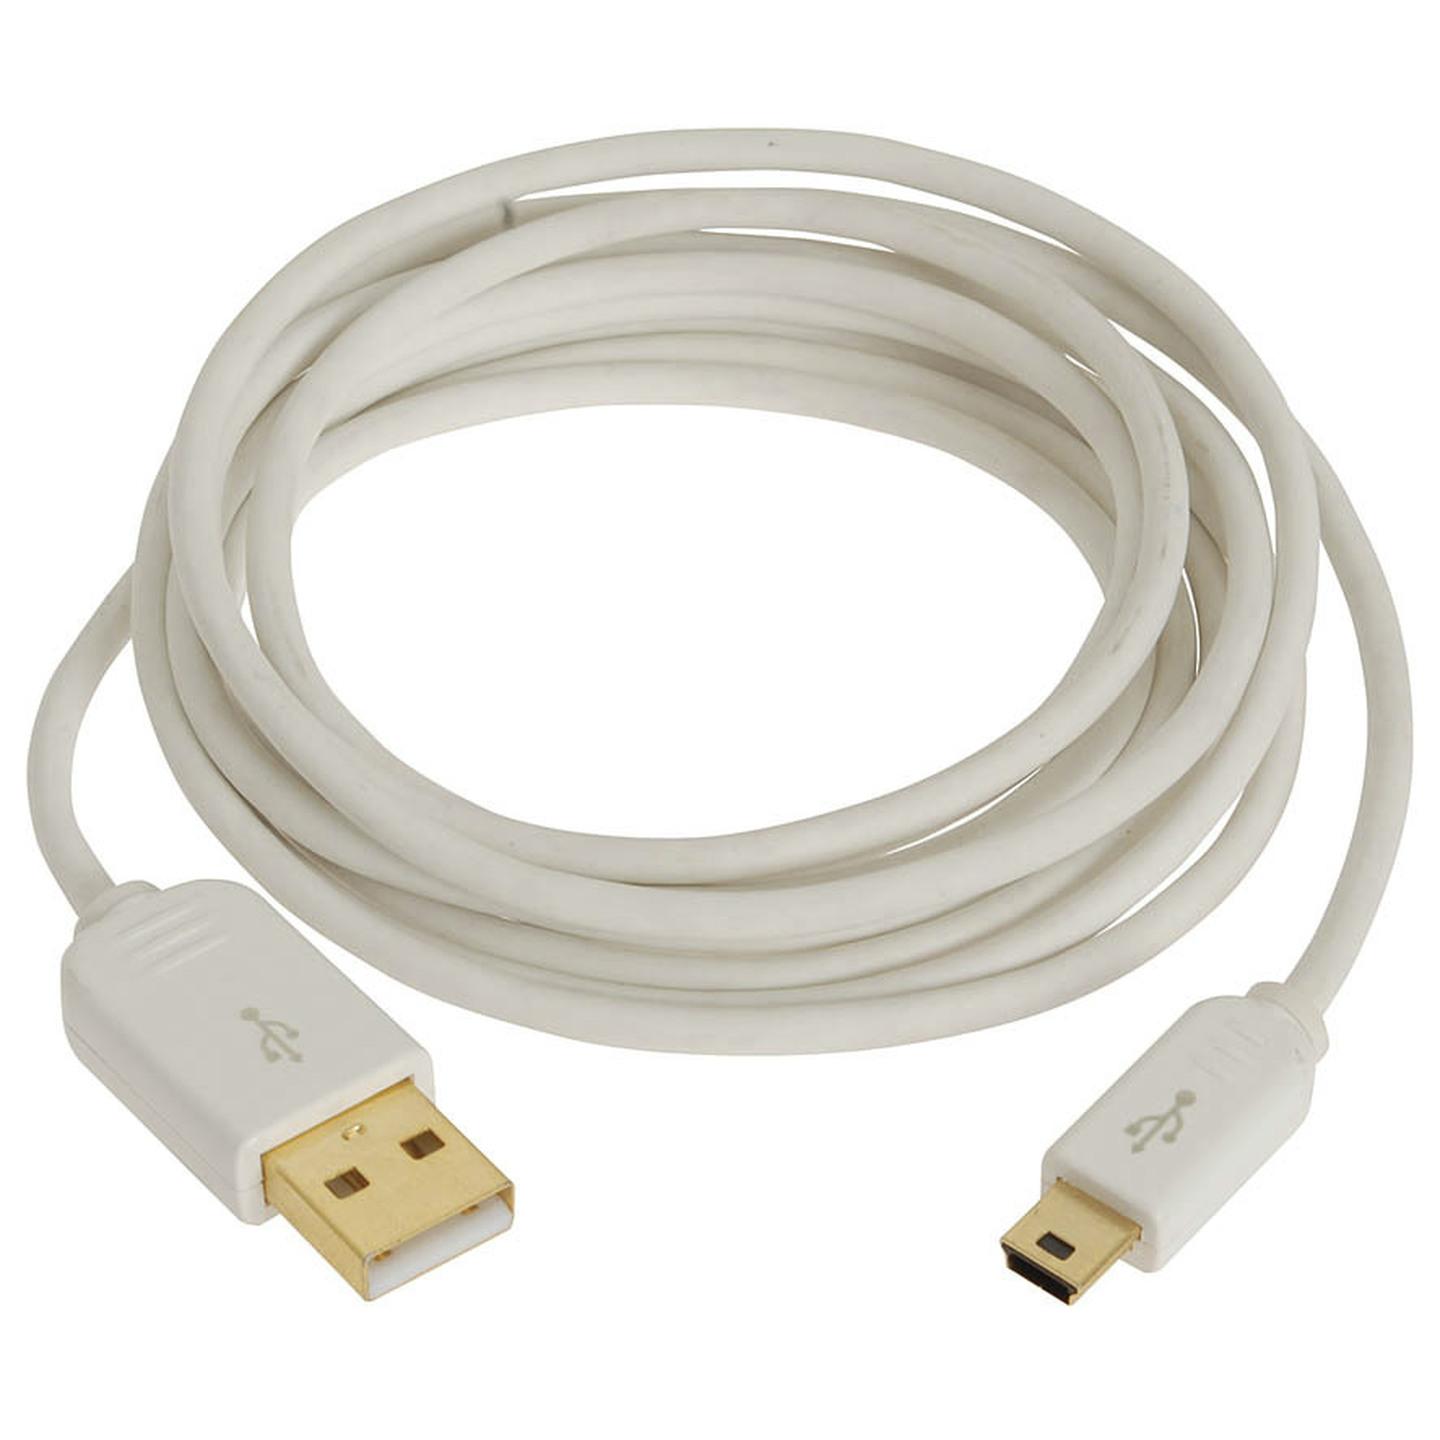 High Quality USB A Male to USB Mini B Male Cable - 2m